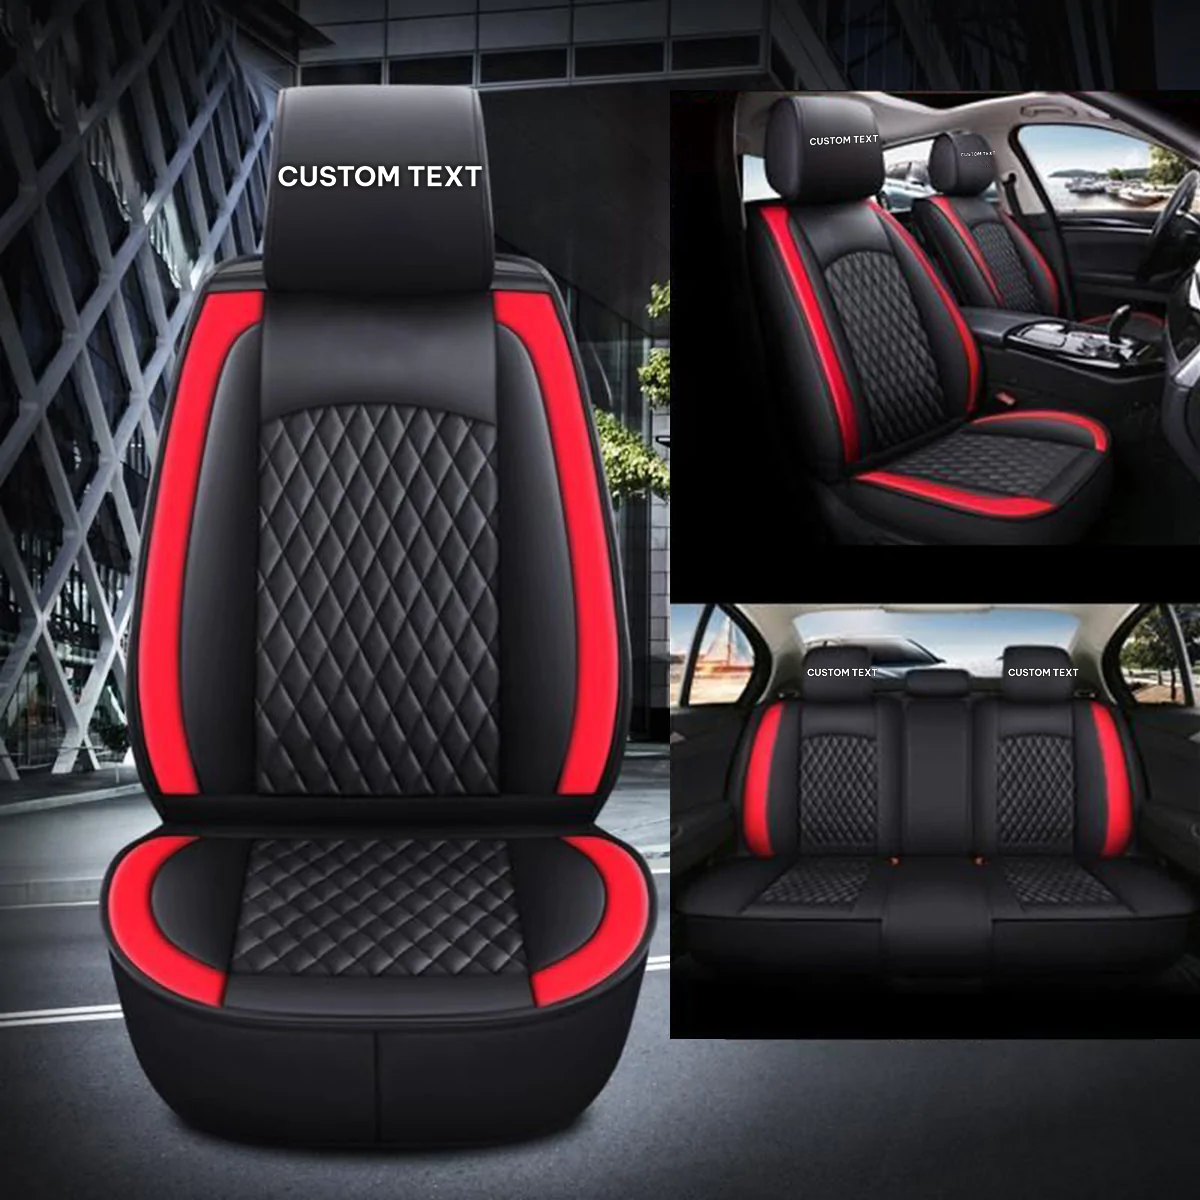 Custom Text For Seat Covers 5 Seats Full Set, Custom Fit For Your Cars, Leatherette Automotive Seat Cushion Protector Universal Fit, Vehicle Auto Interior Decor FD13988